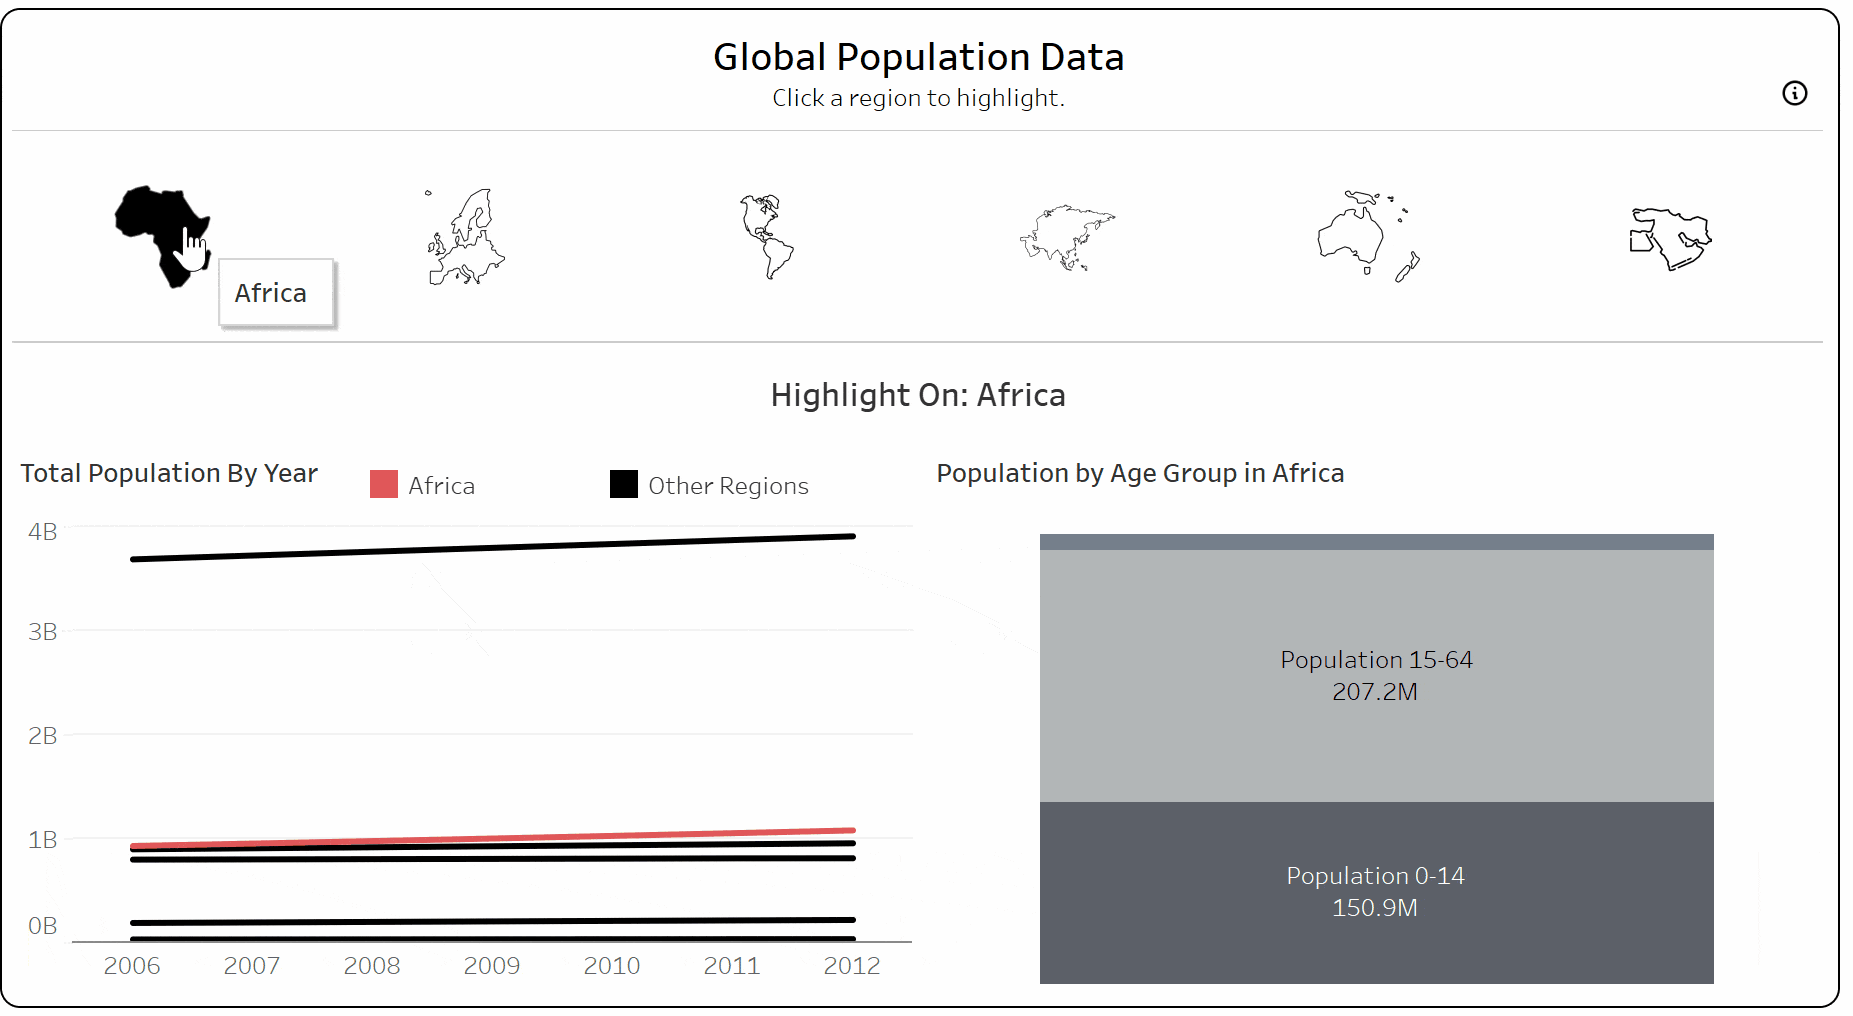 How to Do Button Swapping with Parameters in Tableau